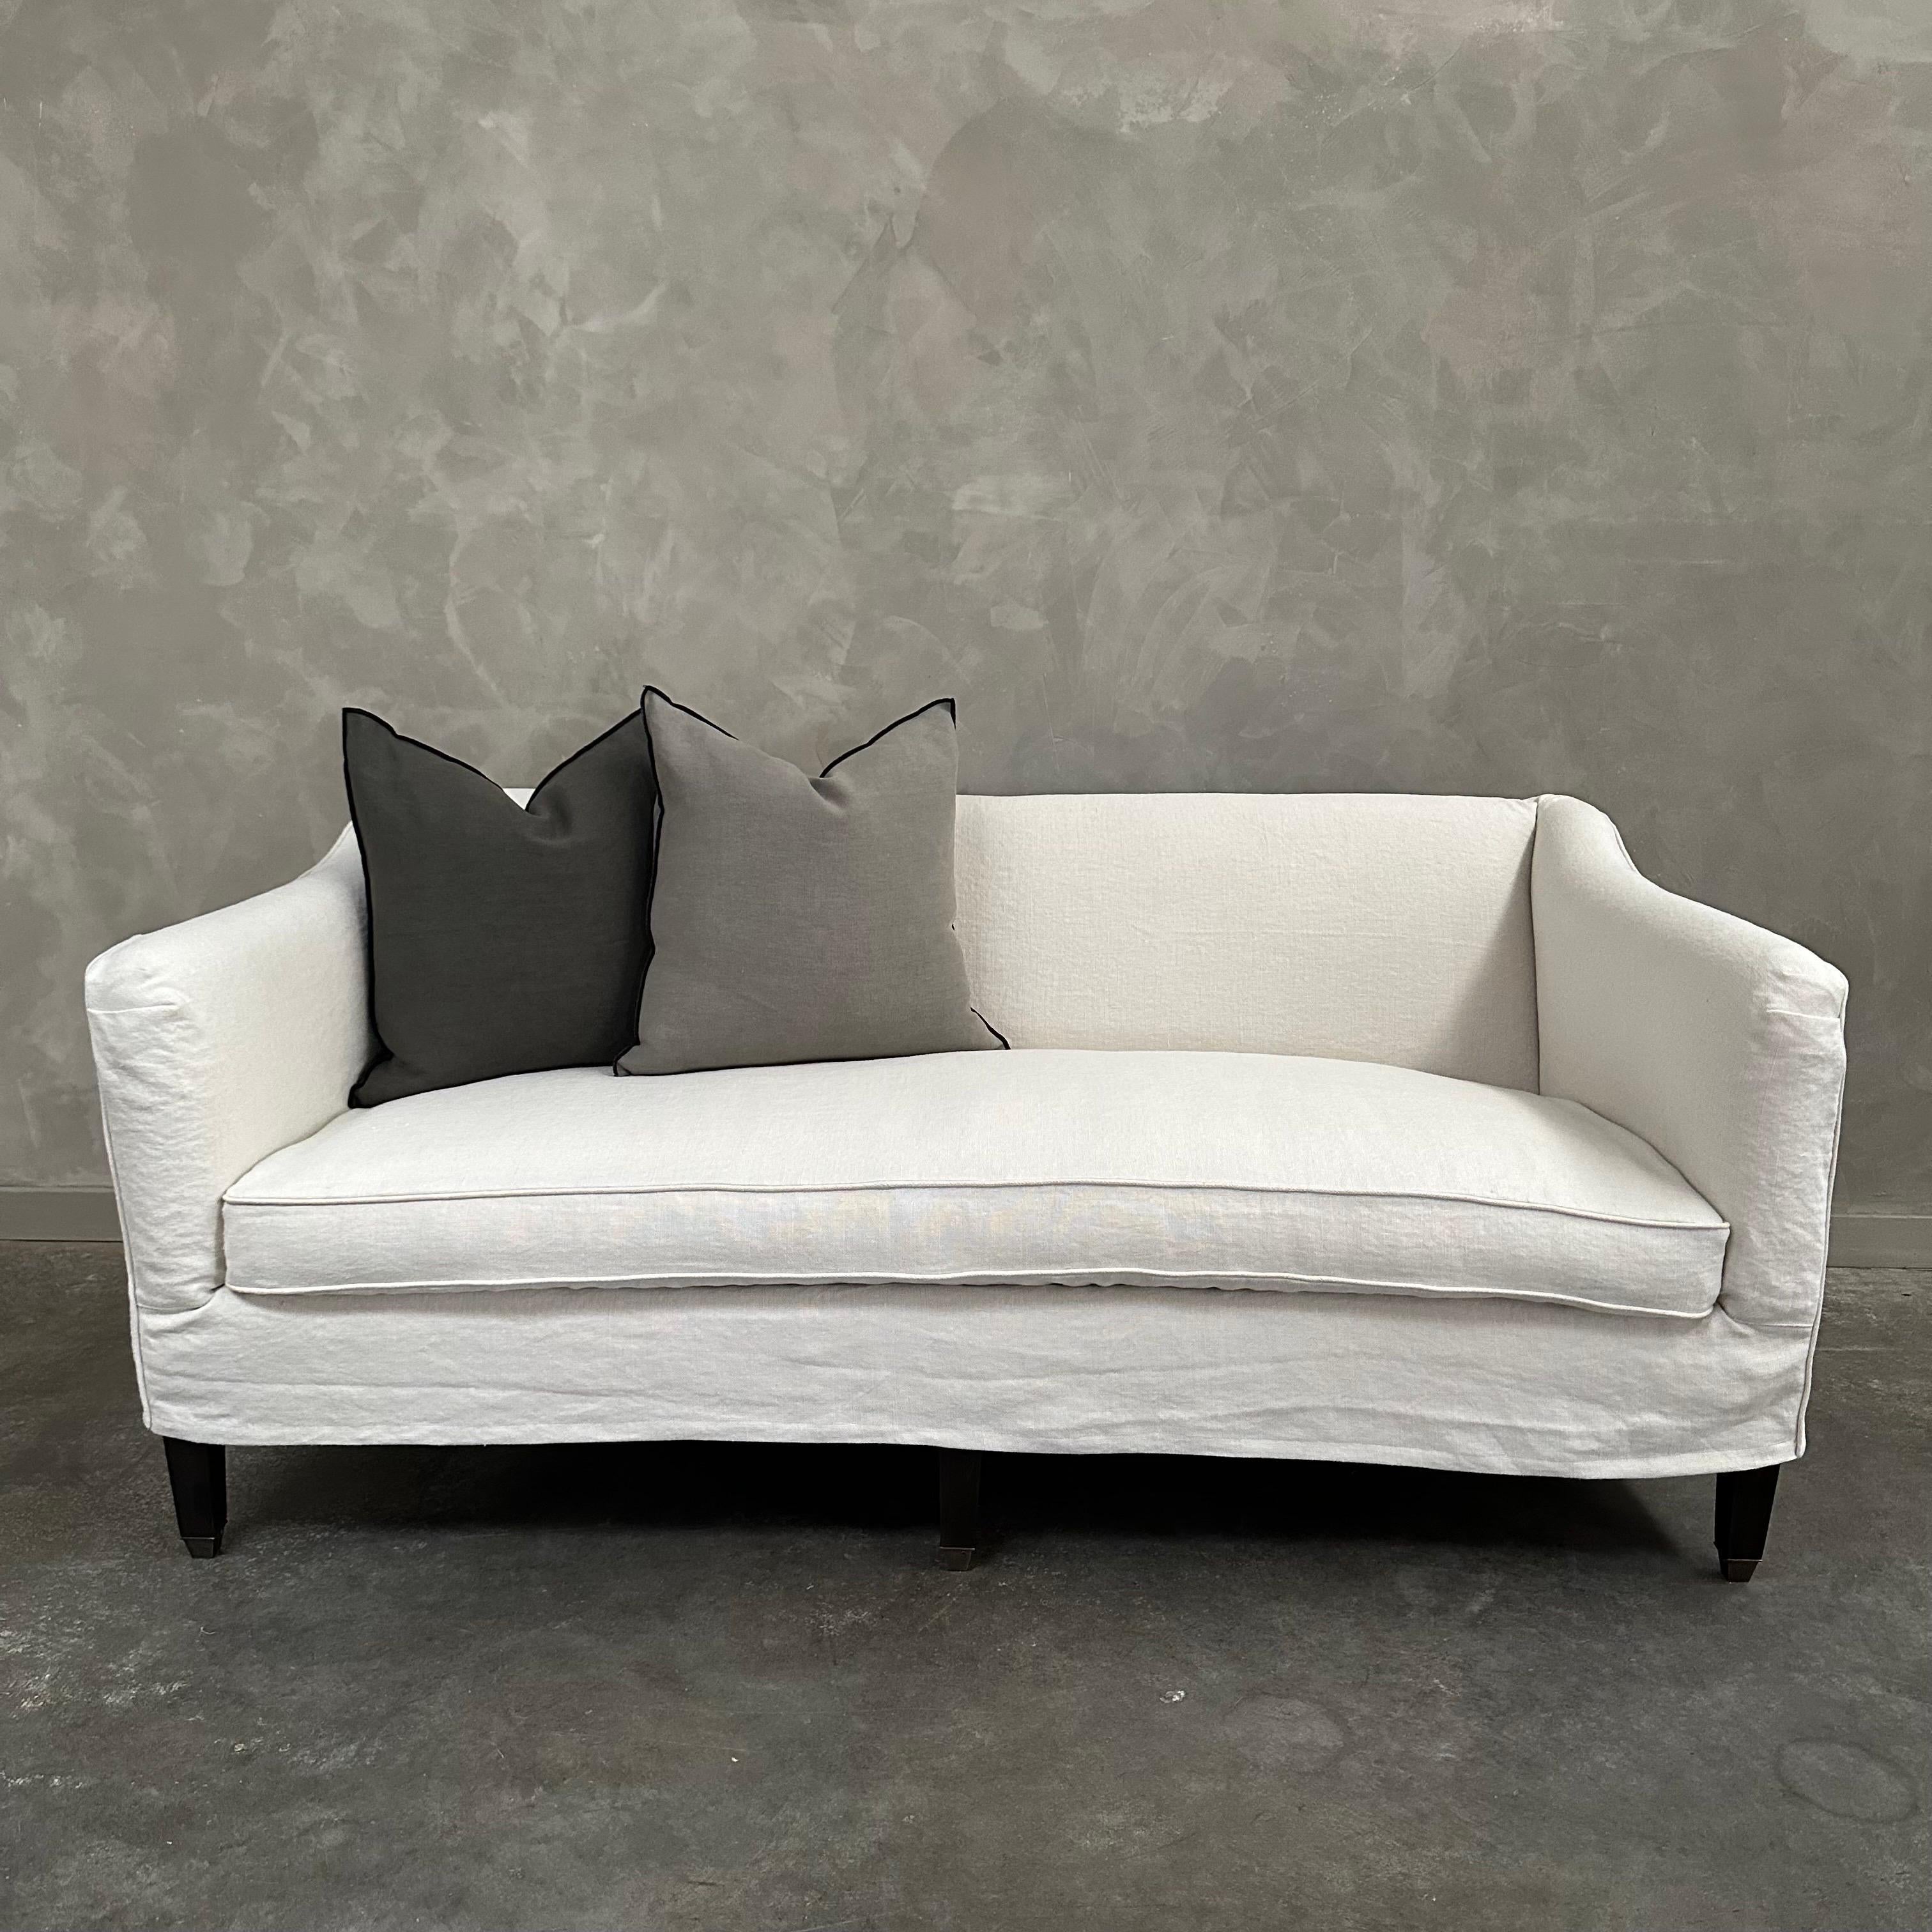 Bloom Slip Covered Sofa / or Upholstered
Shown: Slip covered in a heavy stone washed Belgian linen in Semi-Bleached Oatmeal 
Legs: Dark Walnut Finish with Brass Finished Caps
Single bench seat cushion in medium density foam with a down / feather